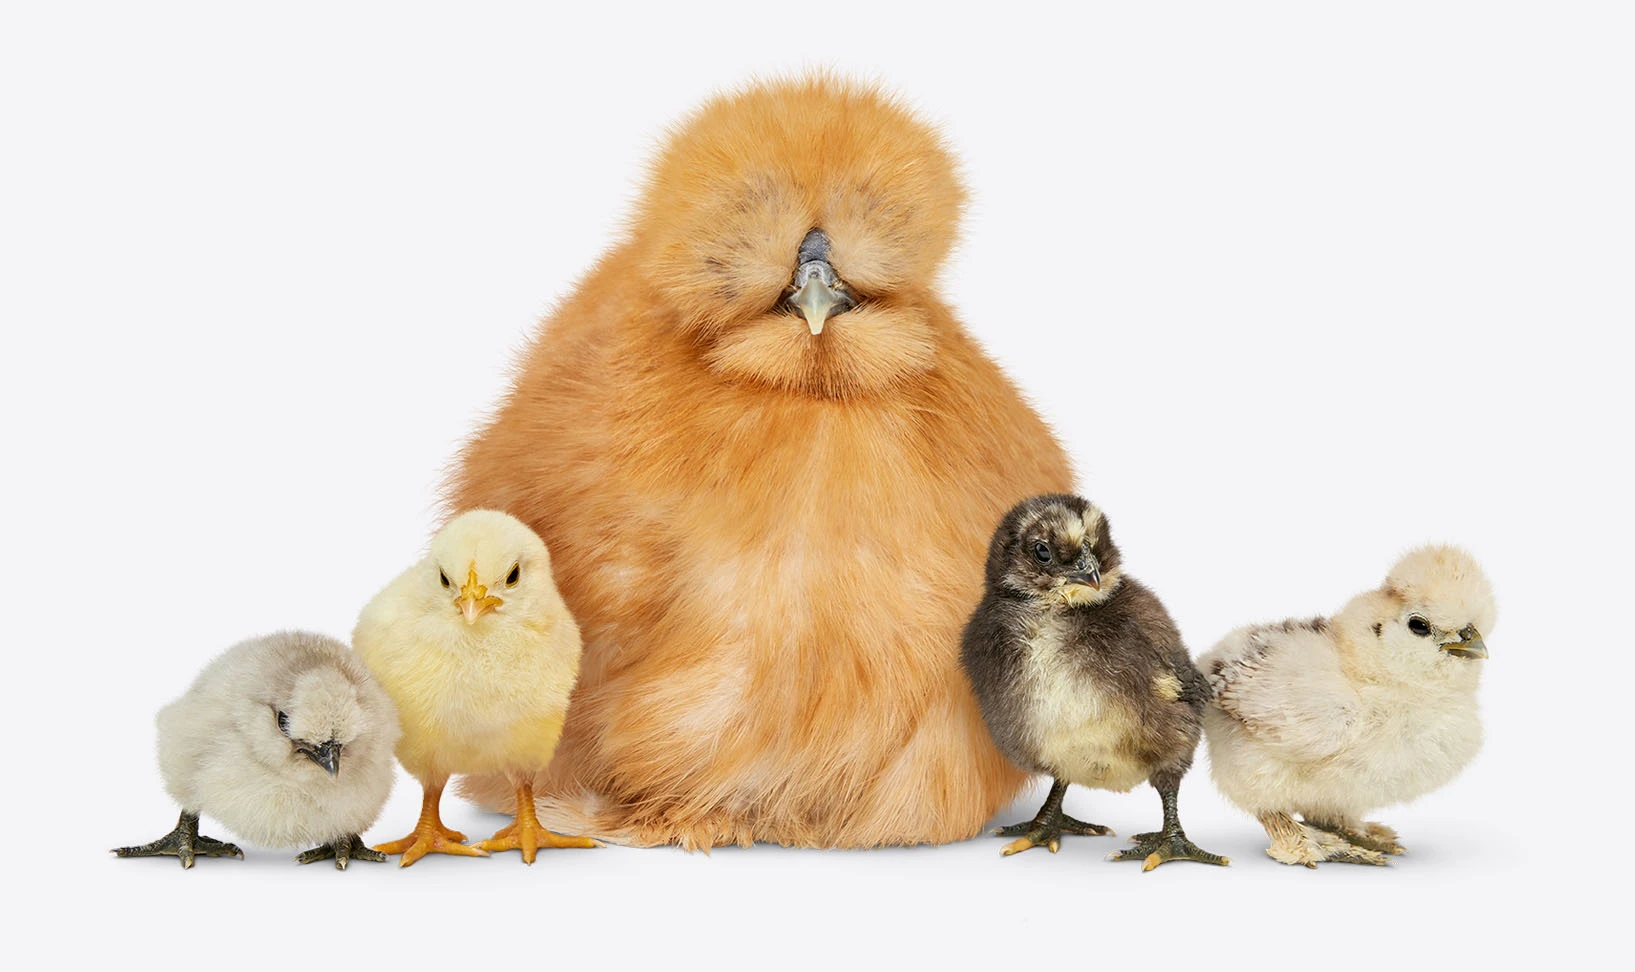 A family of one chicken with four chicks